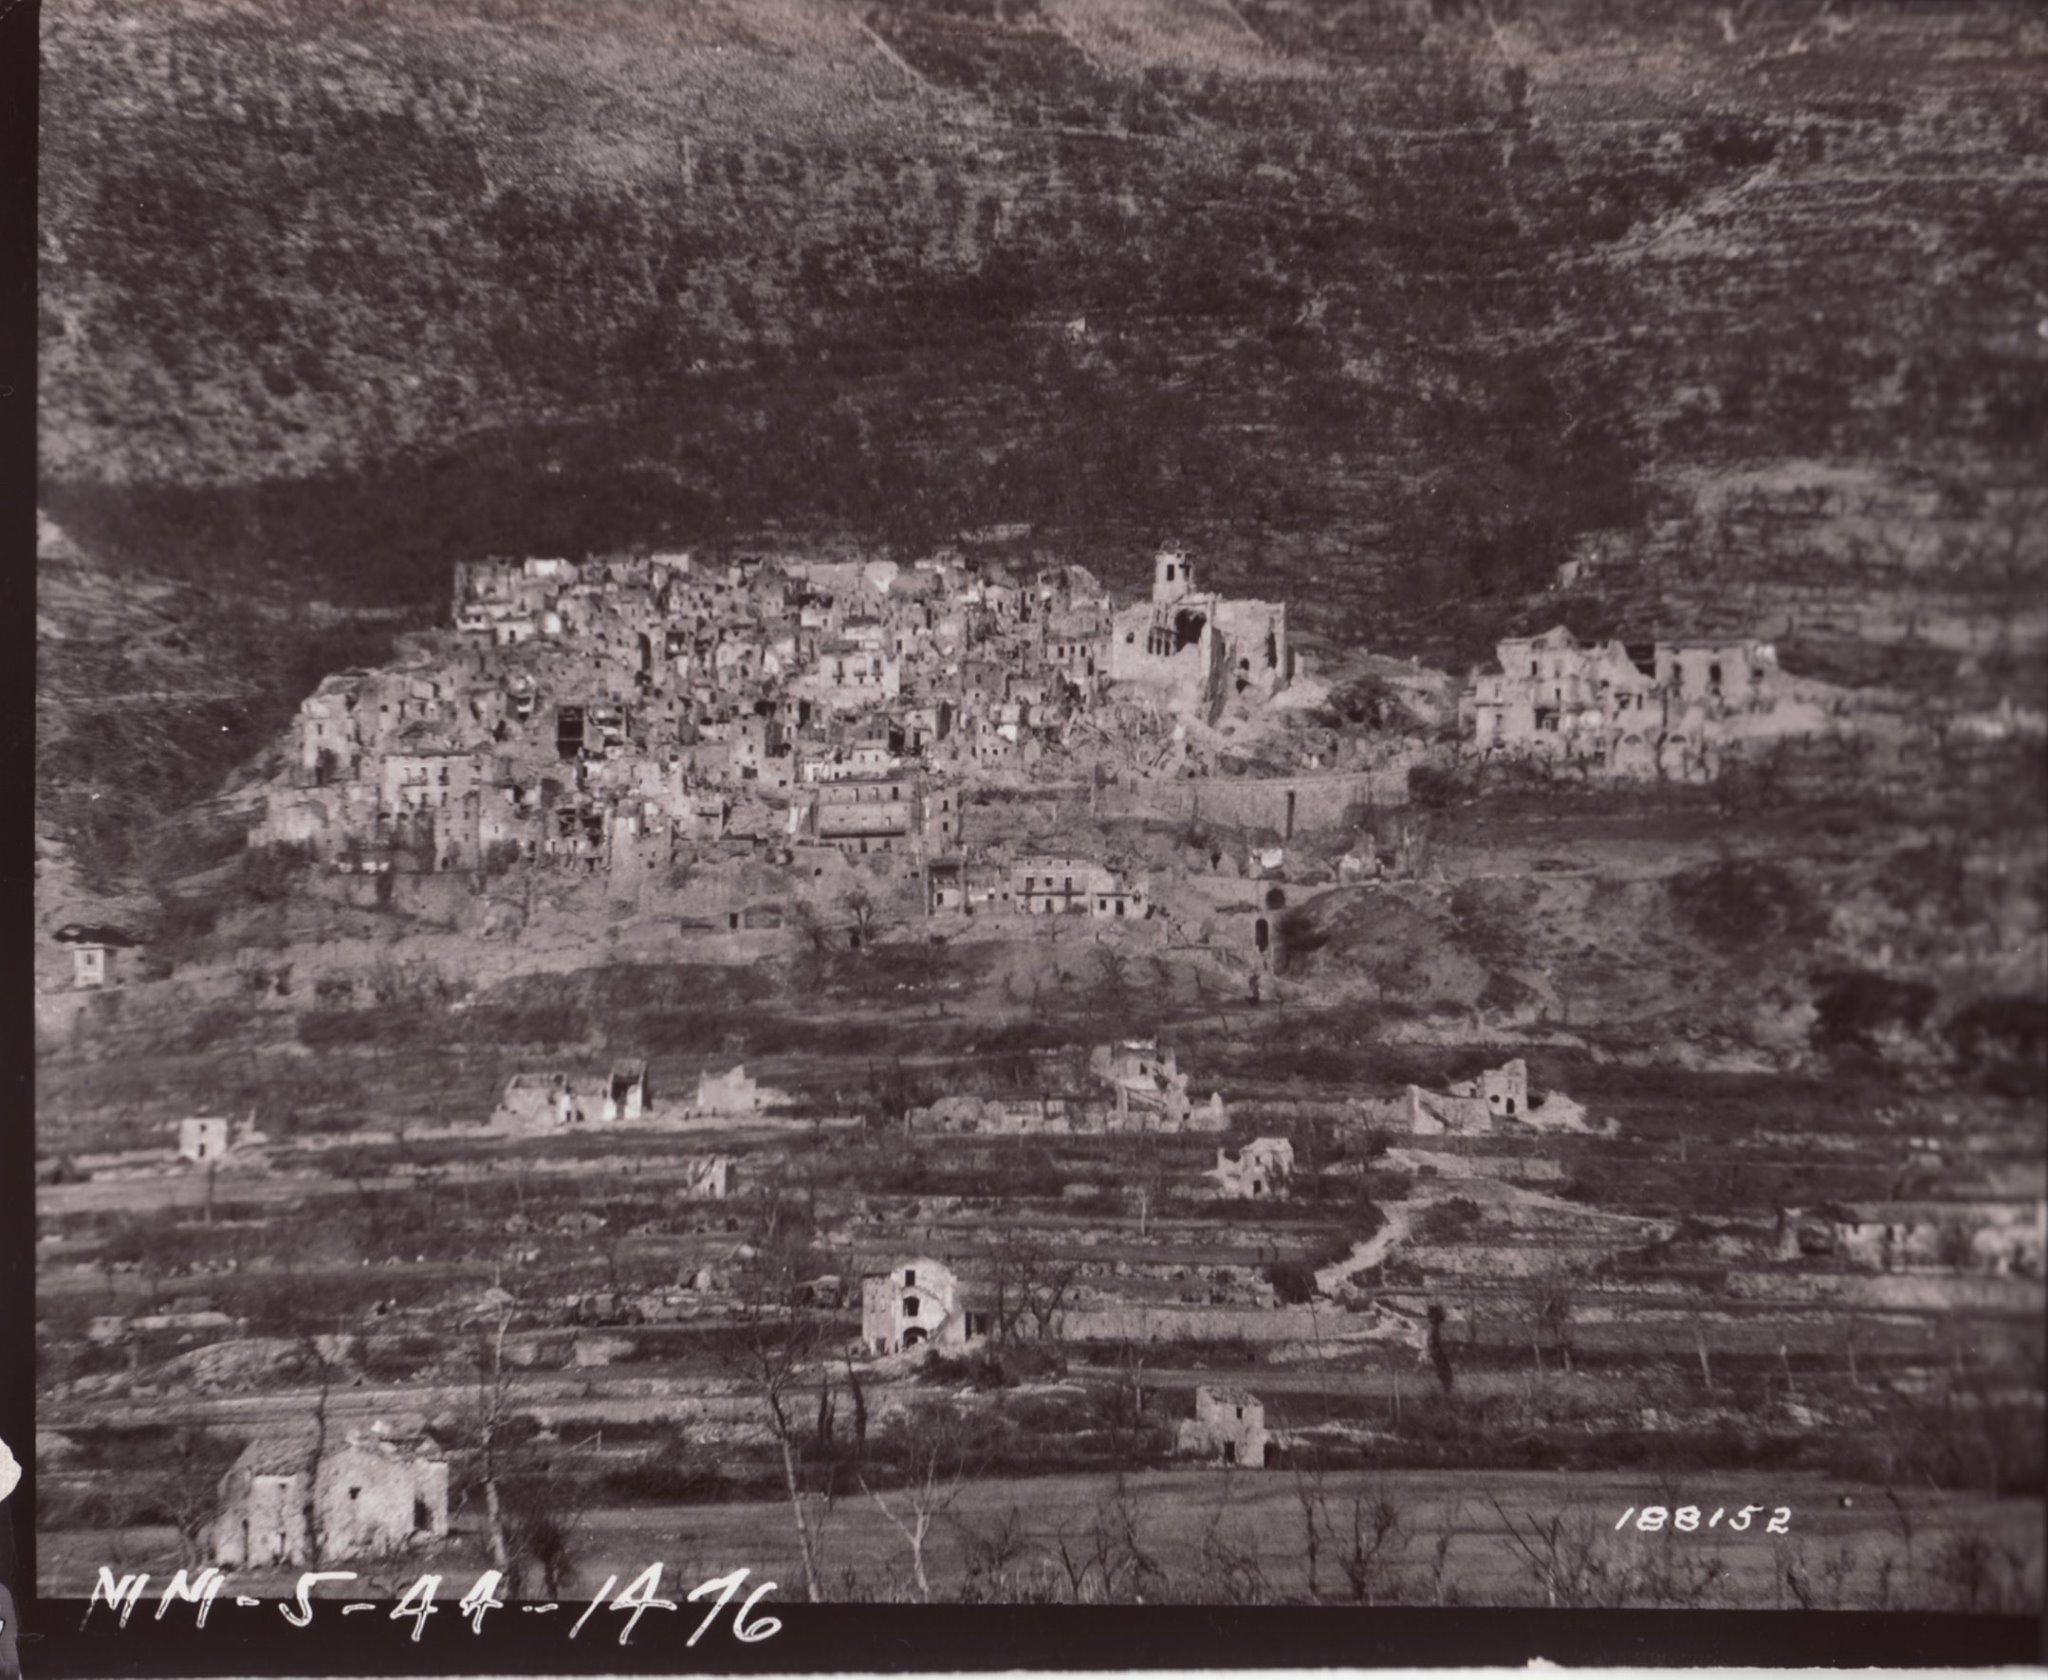 <p class='eng'>San Pietro reduced to ruins, December 1943. The eviscerated church of St. Michael the Archangel can be seen looming over other buildings in the village.</p>